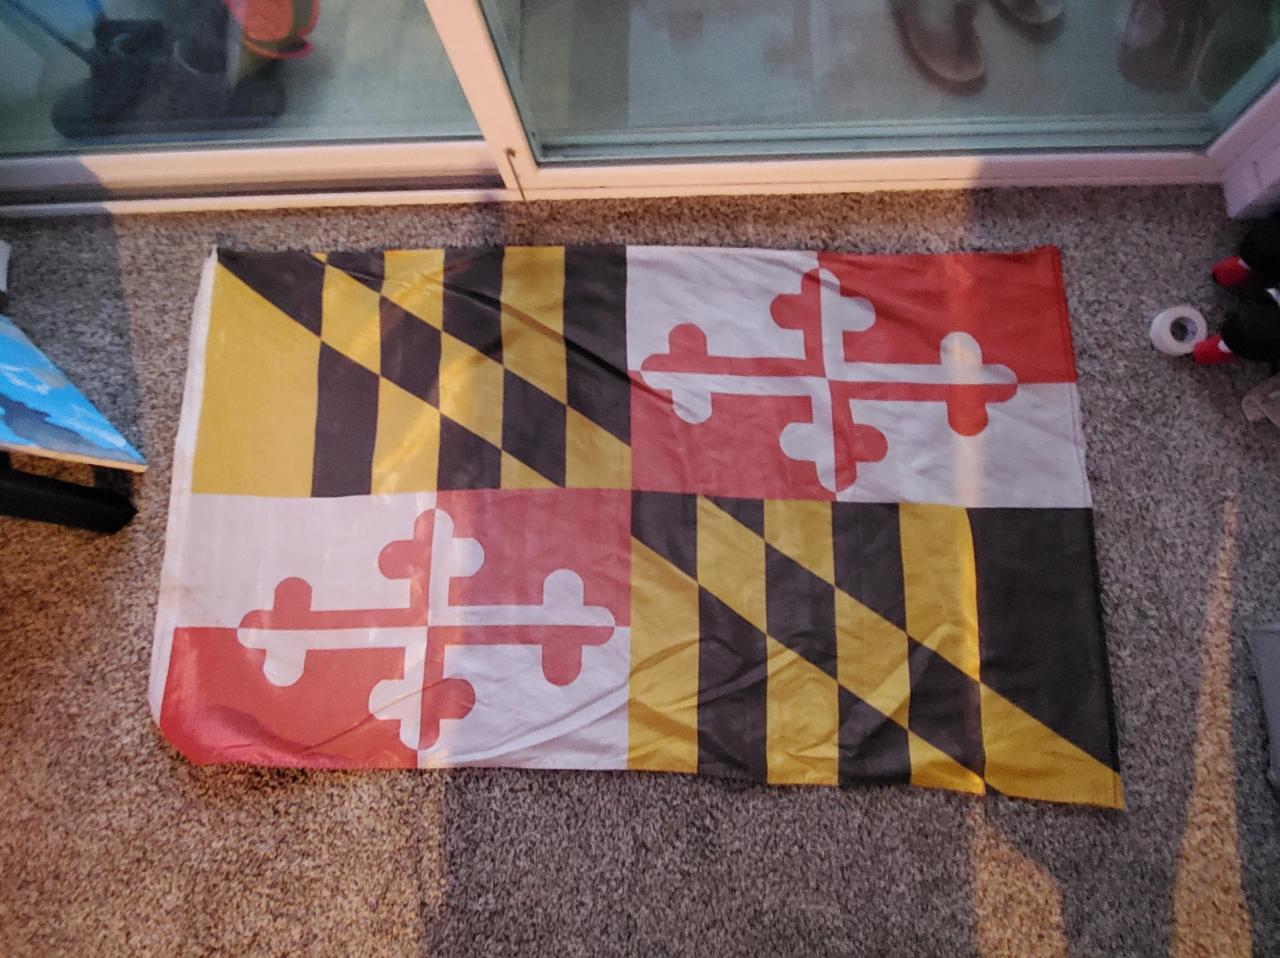 Underrated flag in my opinion. Glad to add this one to my collection.from /r/vexillology 

Top comment: !wave #Underrated#flag #opinion. #Glad#add#one #collection. #flags#vexillology